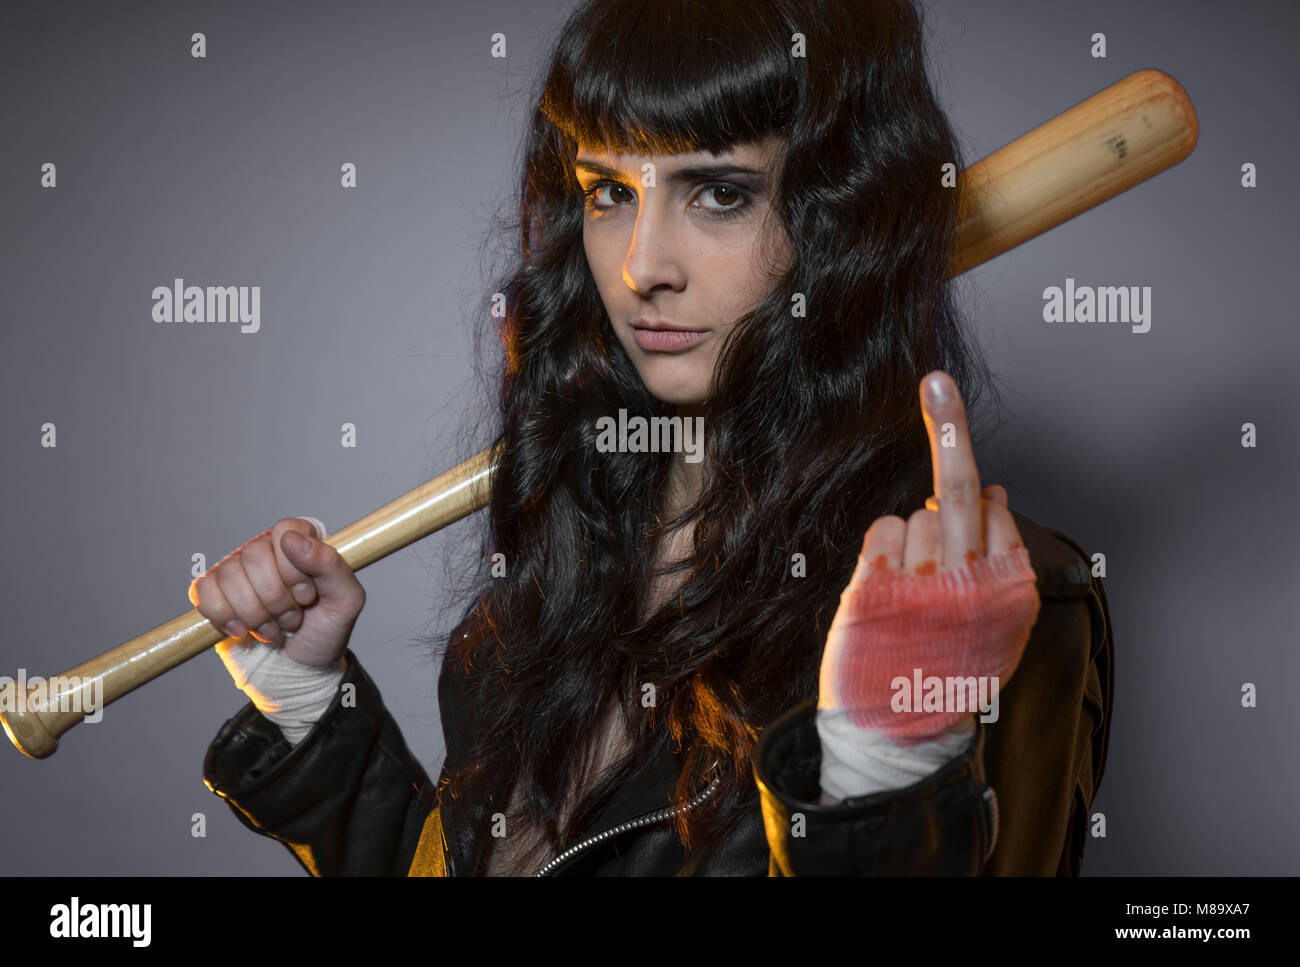 Trouble, adolescence and delinquency, brunette woman in leather jacket and baseball bat with challenging aptitude Stock Photo